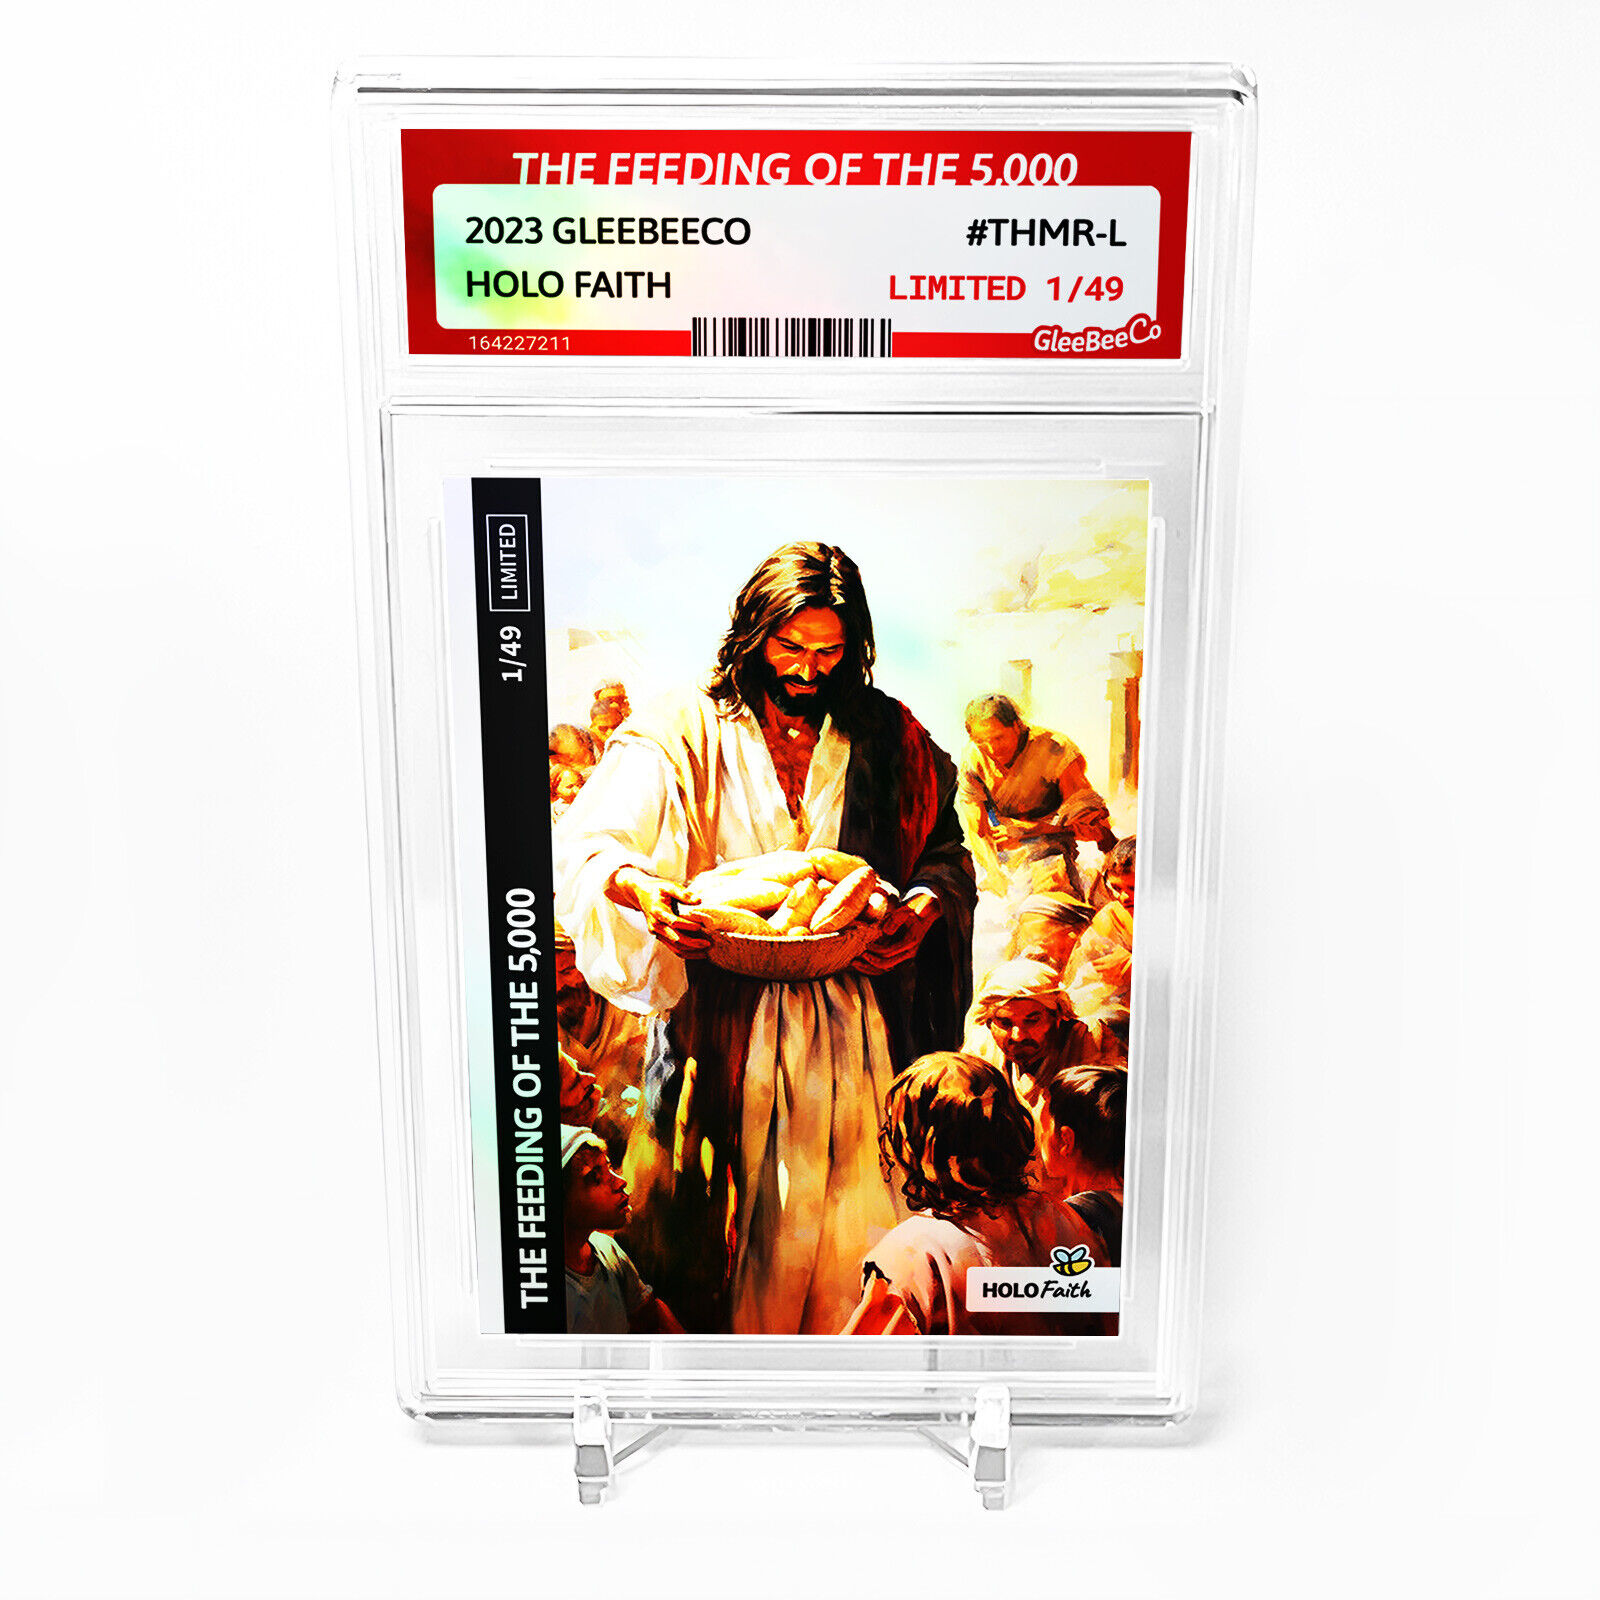 THE FEEDING OF THE 5,000 Miracles of Jesus 2023 GleeBeeCo Holo Card #THMR-L /49